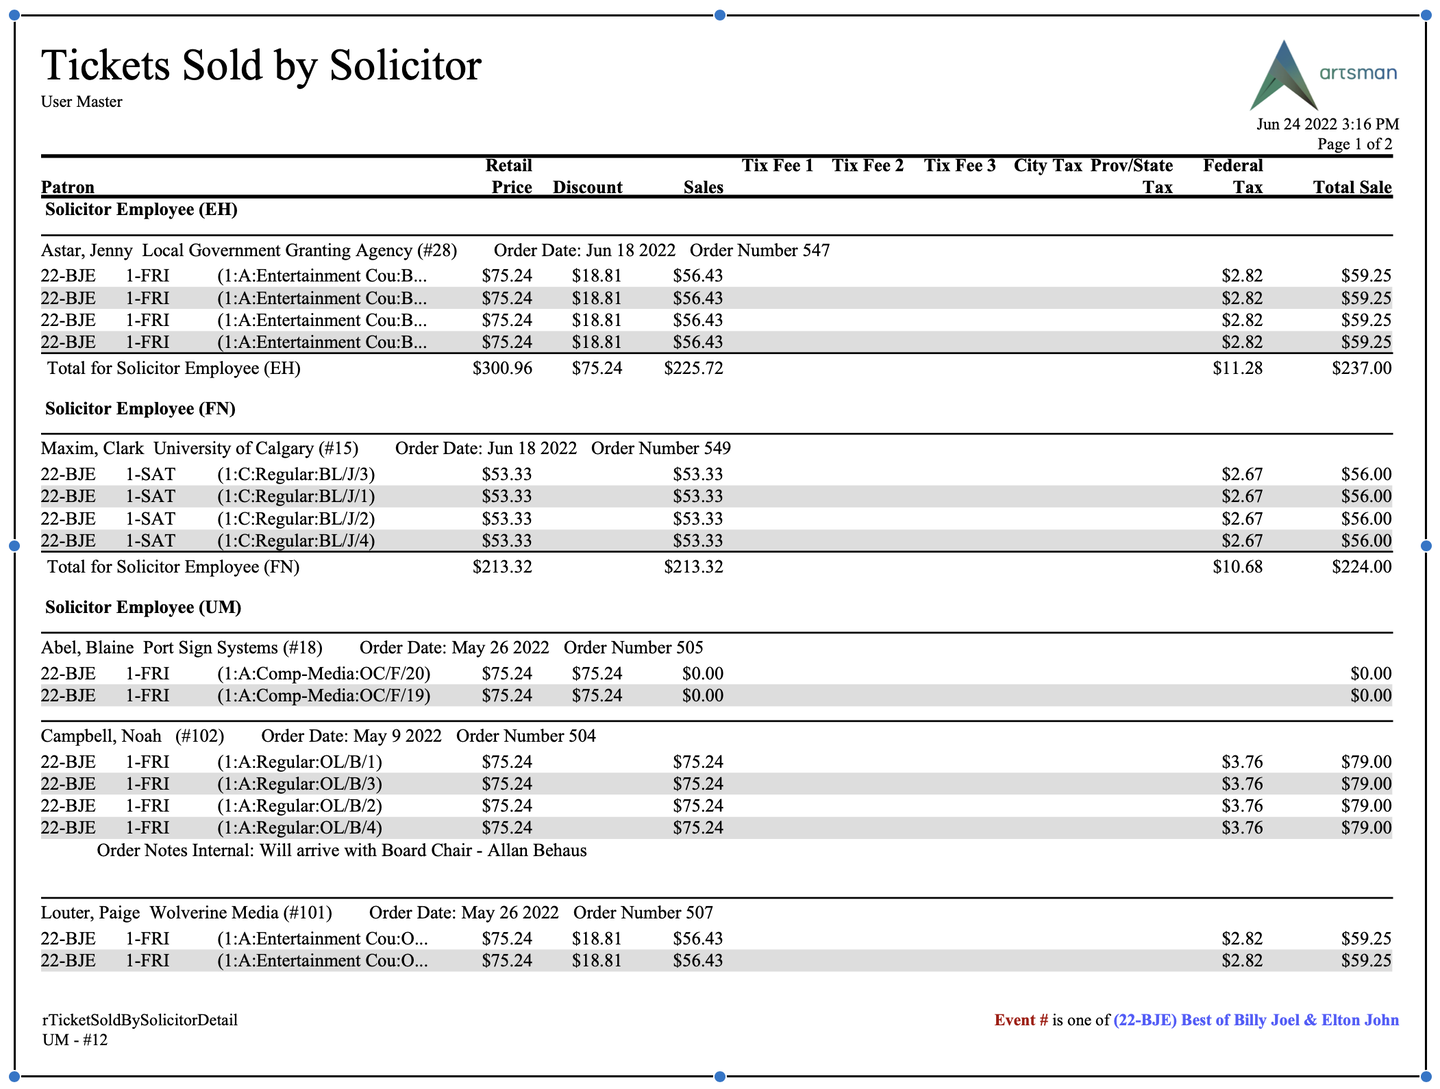 Ticket Sales by Solicitor (Detail)